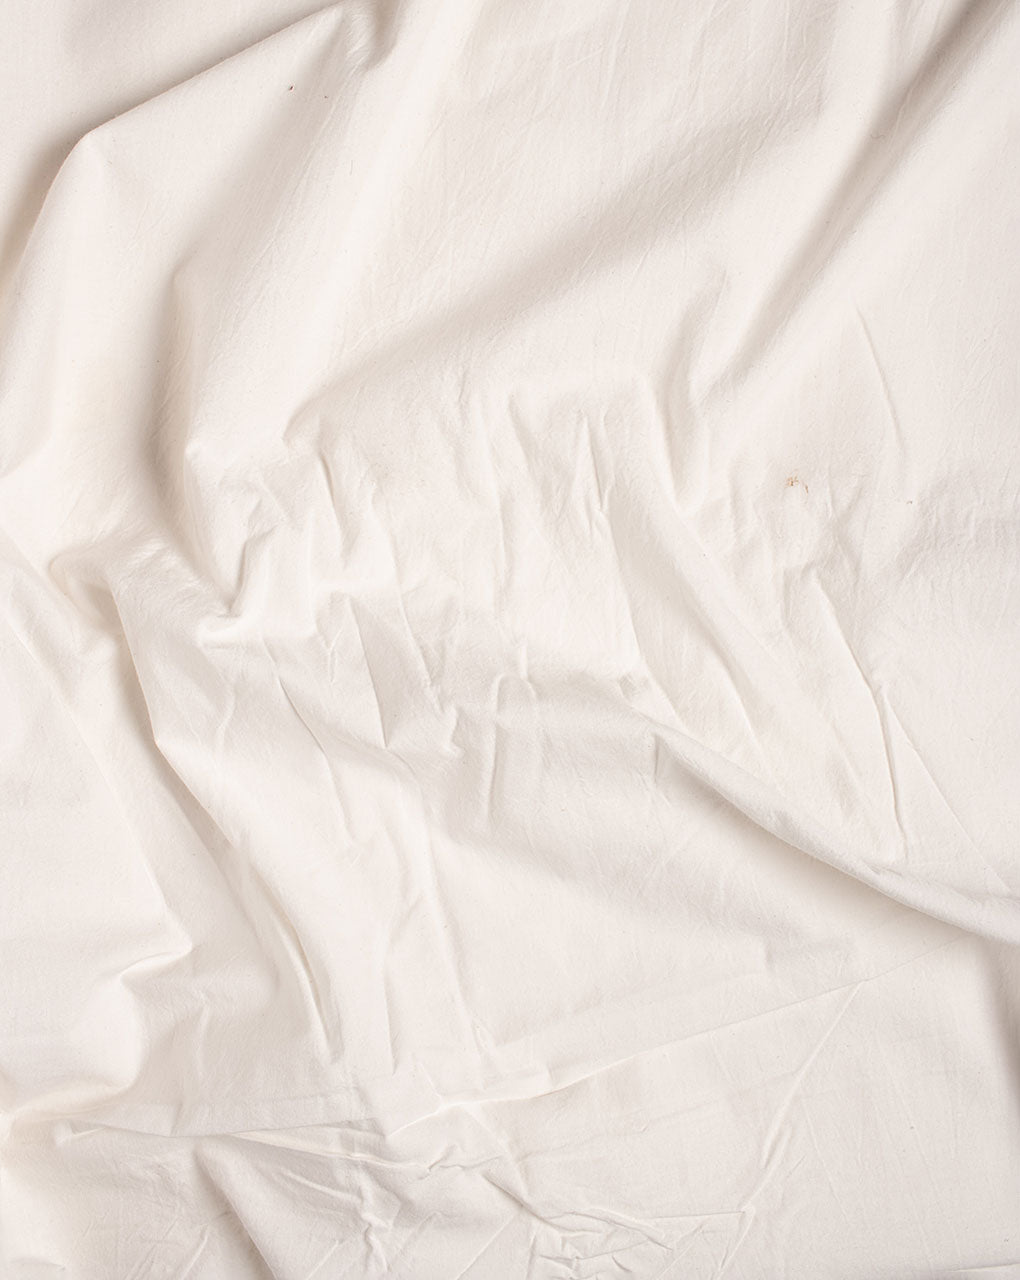 Light Texture Plain White Cotton Cloth - 44 Inches Width And 30 Meter Long  Density: 145 Gram Per Cubic Centimeter(g/cm3) at Best Price in Varanasi